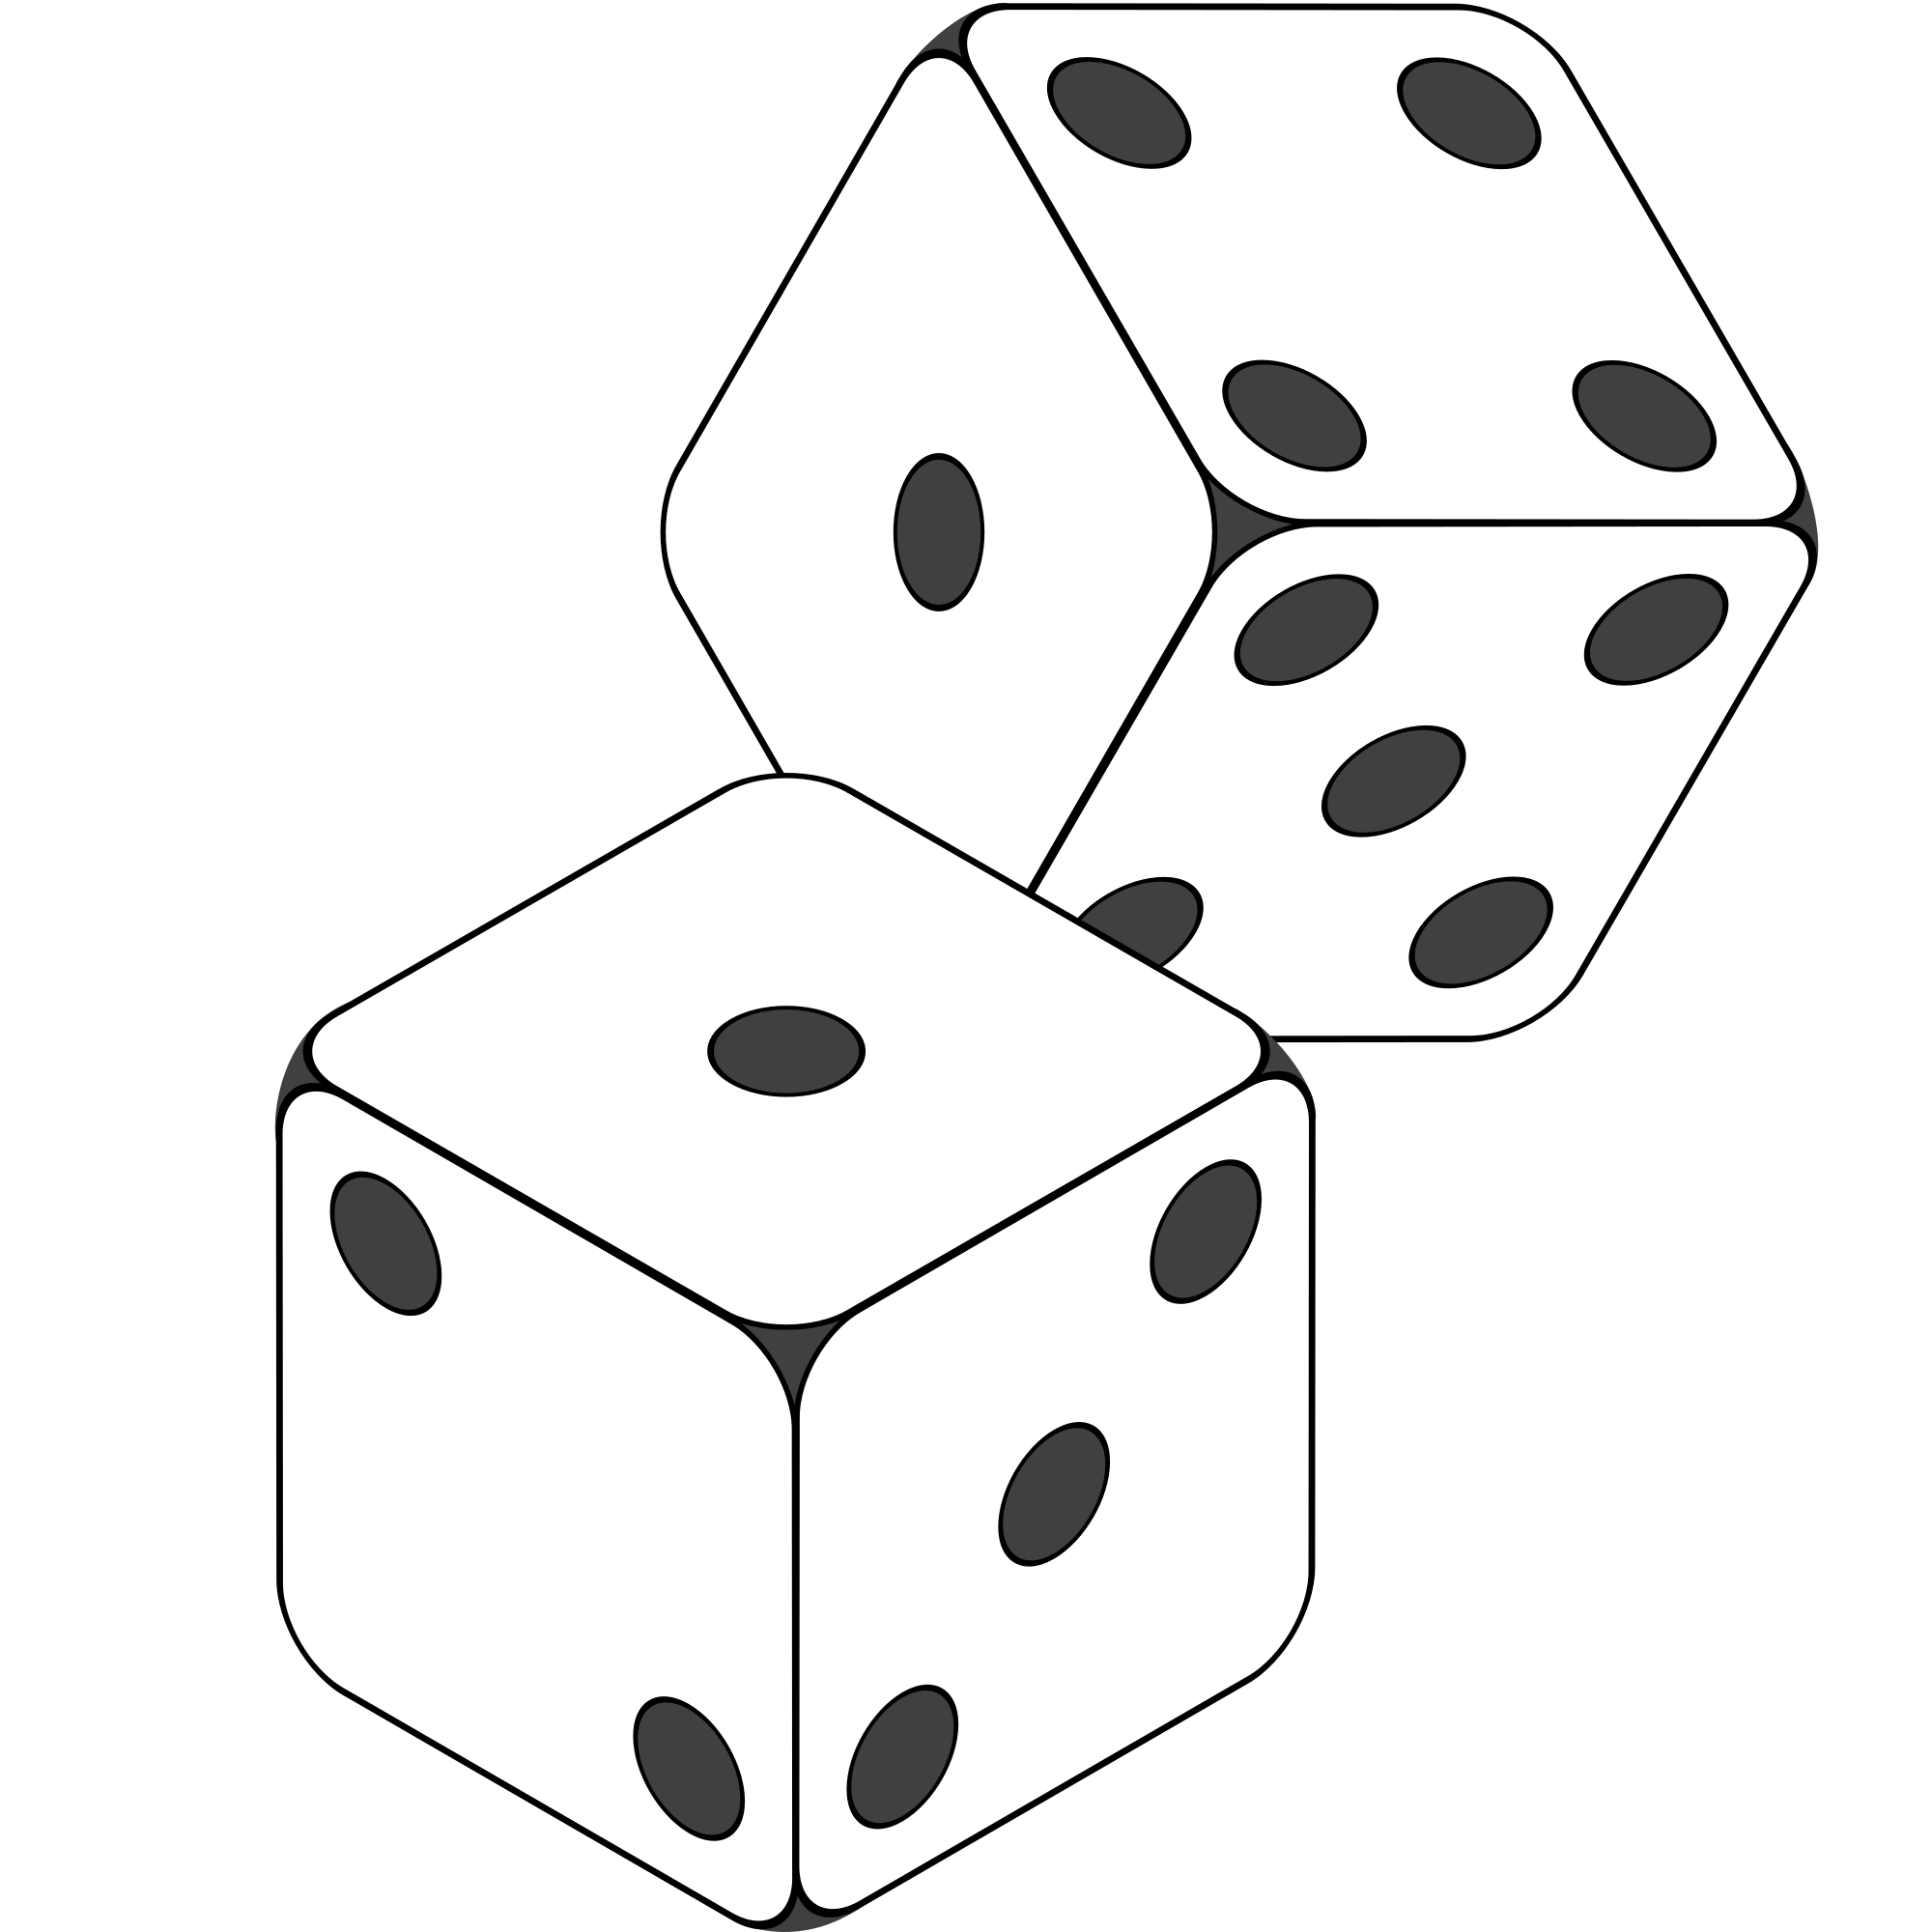 dice-clipart-printable-pictures-on-cliparts-pub-2020